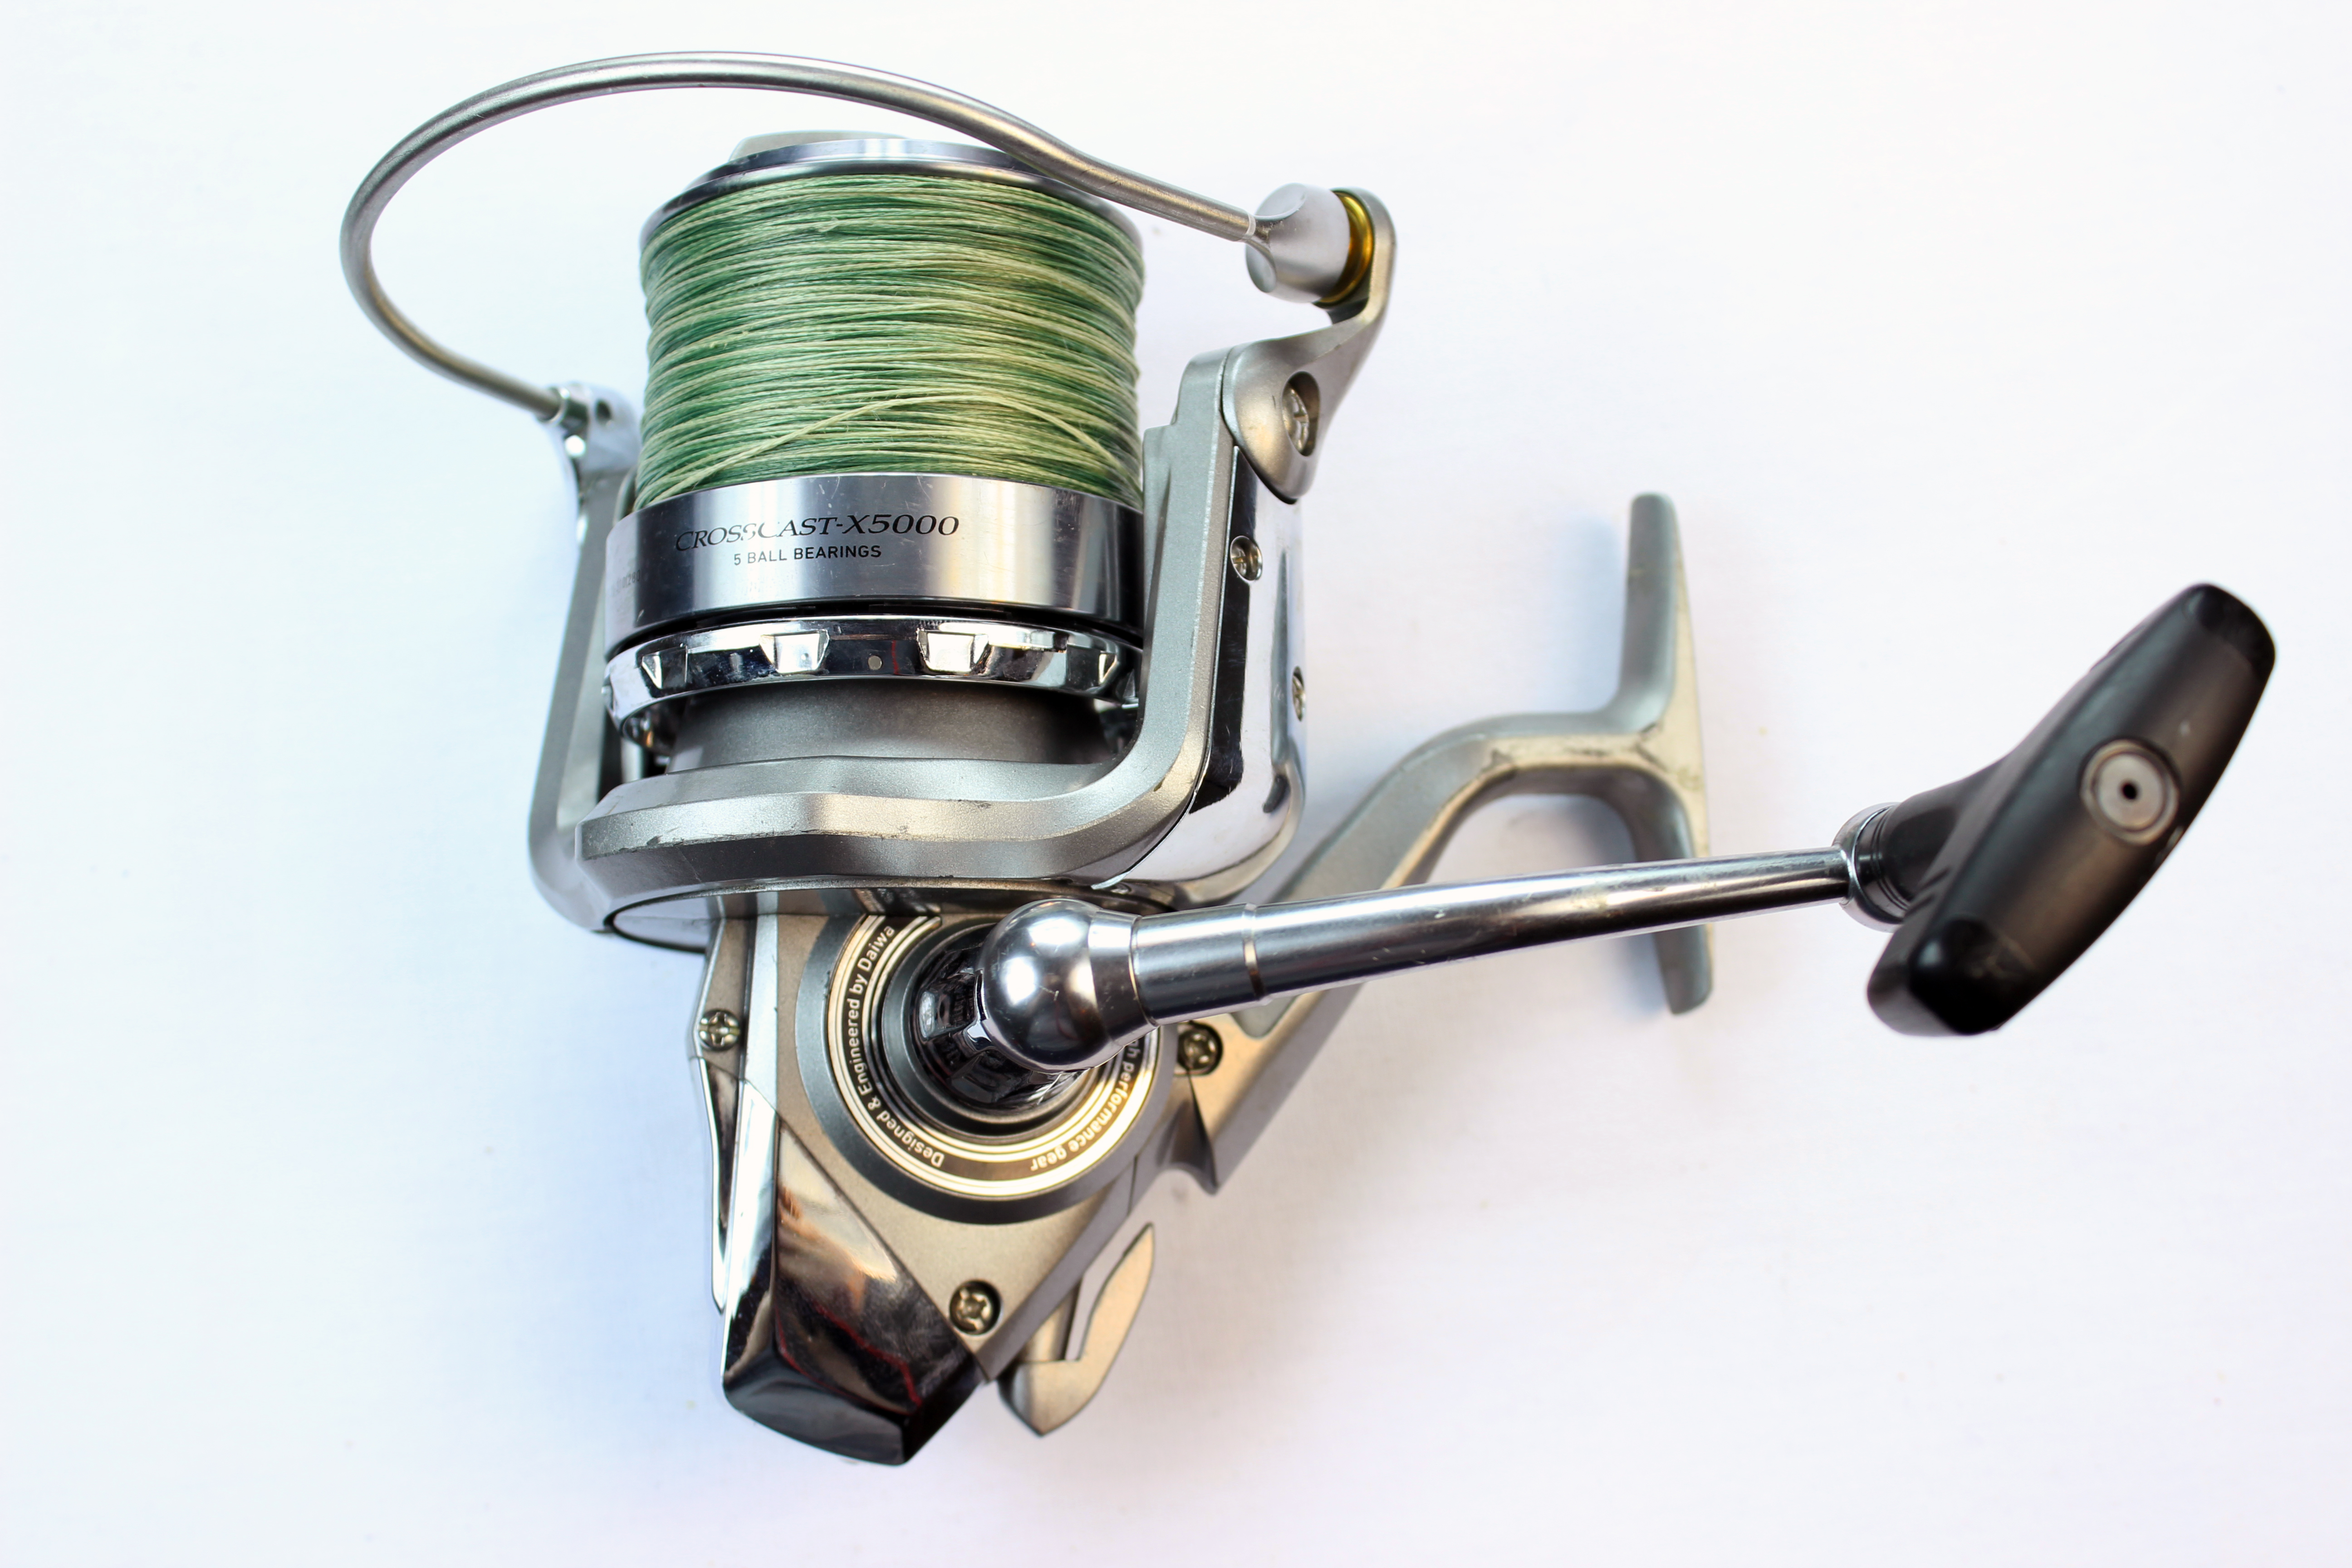 Can I use a open faced reel on a rod that was designed for a